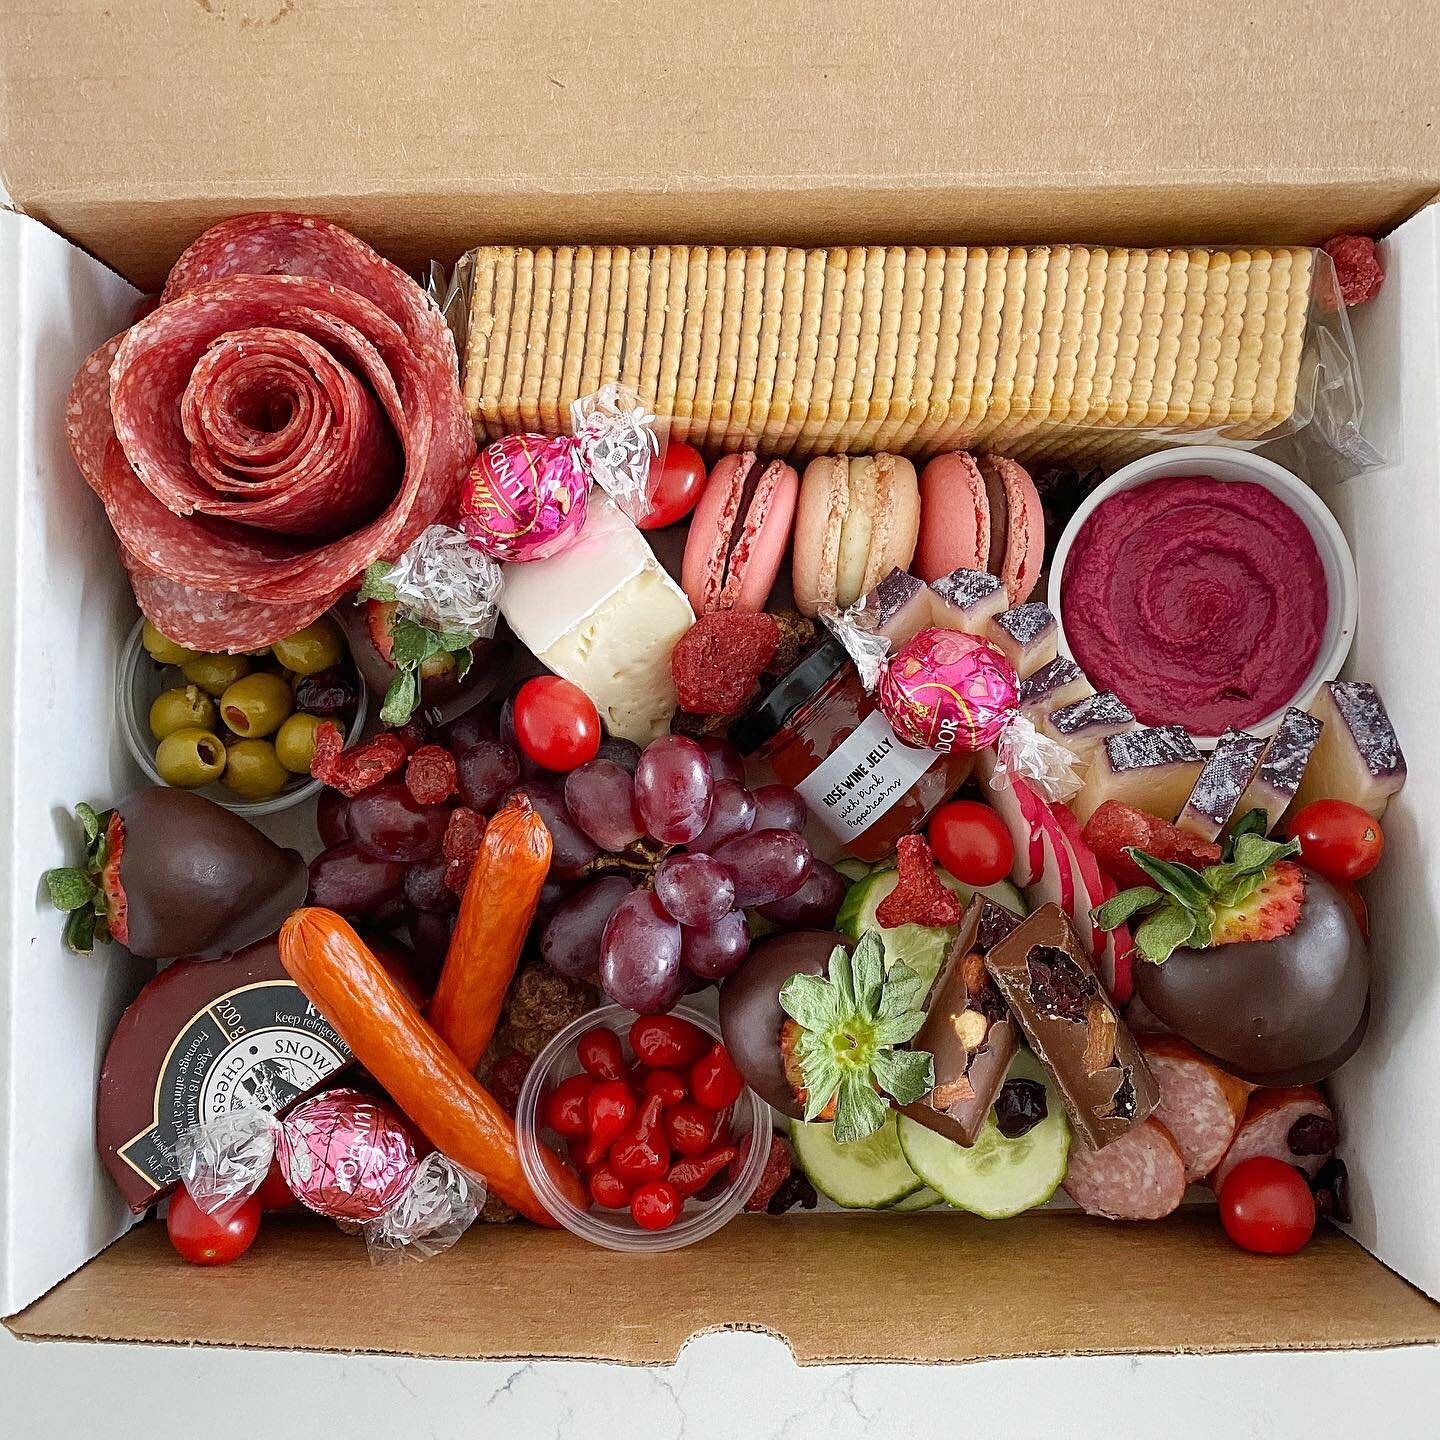 Valentine&rsquo;s Day Boxes are here!⁣
⁣
Treat your loved one to a beautiful and delicious box of all the treats &ndash; sweet and savoury.⁣
⁣
Includes:⁣
⁣
&bull;3 meats (including a salami rose)⁣
&bull;3 cheeses⁣
&bull;Crackers⁣
&bull;Variety of veg